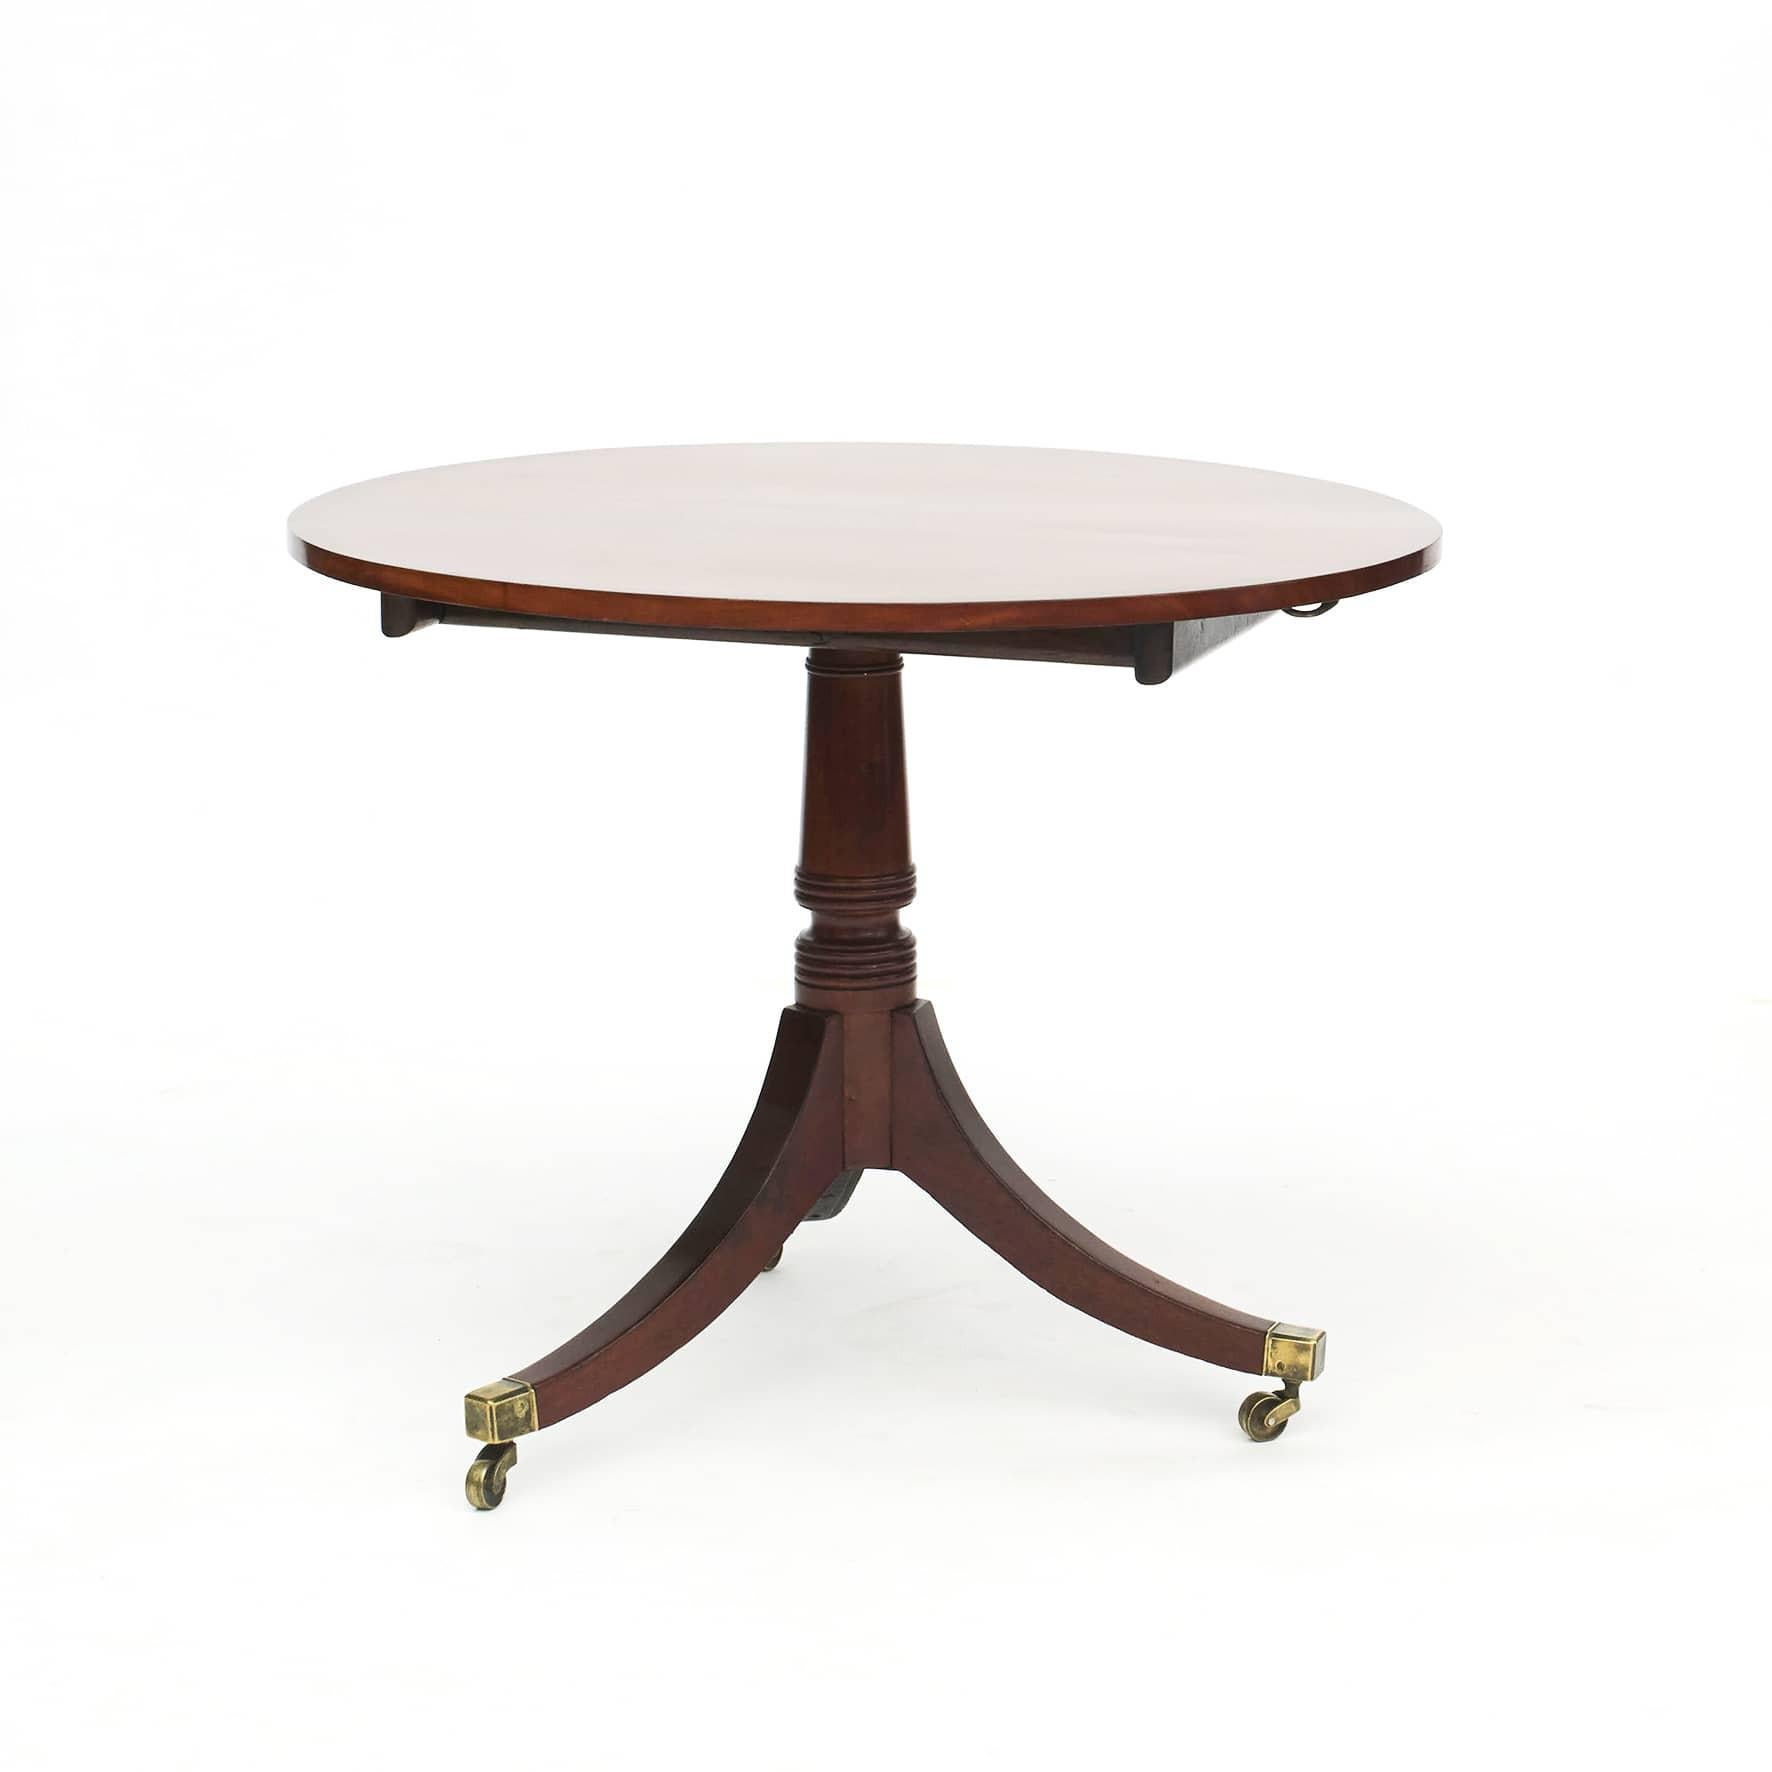 Elegant Regency tilt-top table in mahogany with walnut and satin wood inlays.
Three swept out legs with brass capped caster feet.
Table top can be tilted up.
England 1810-1815.
Original condition, but finished with a very gentle shellac hand